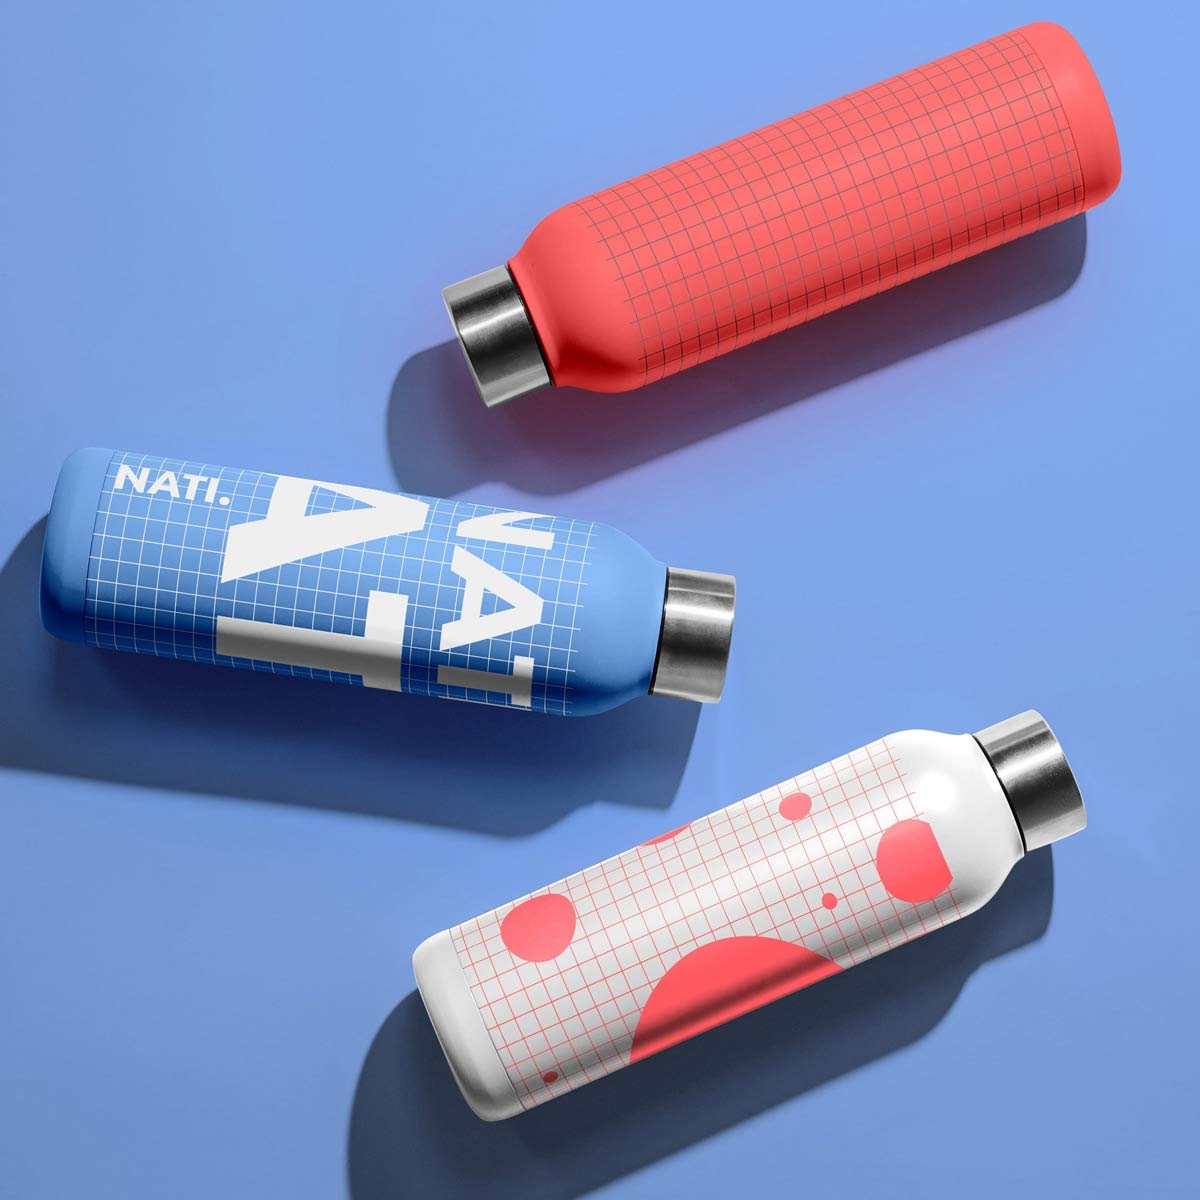 3 stainless steel water bottles on a solid background, free mockup